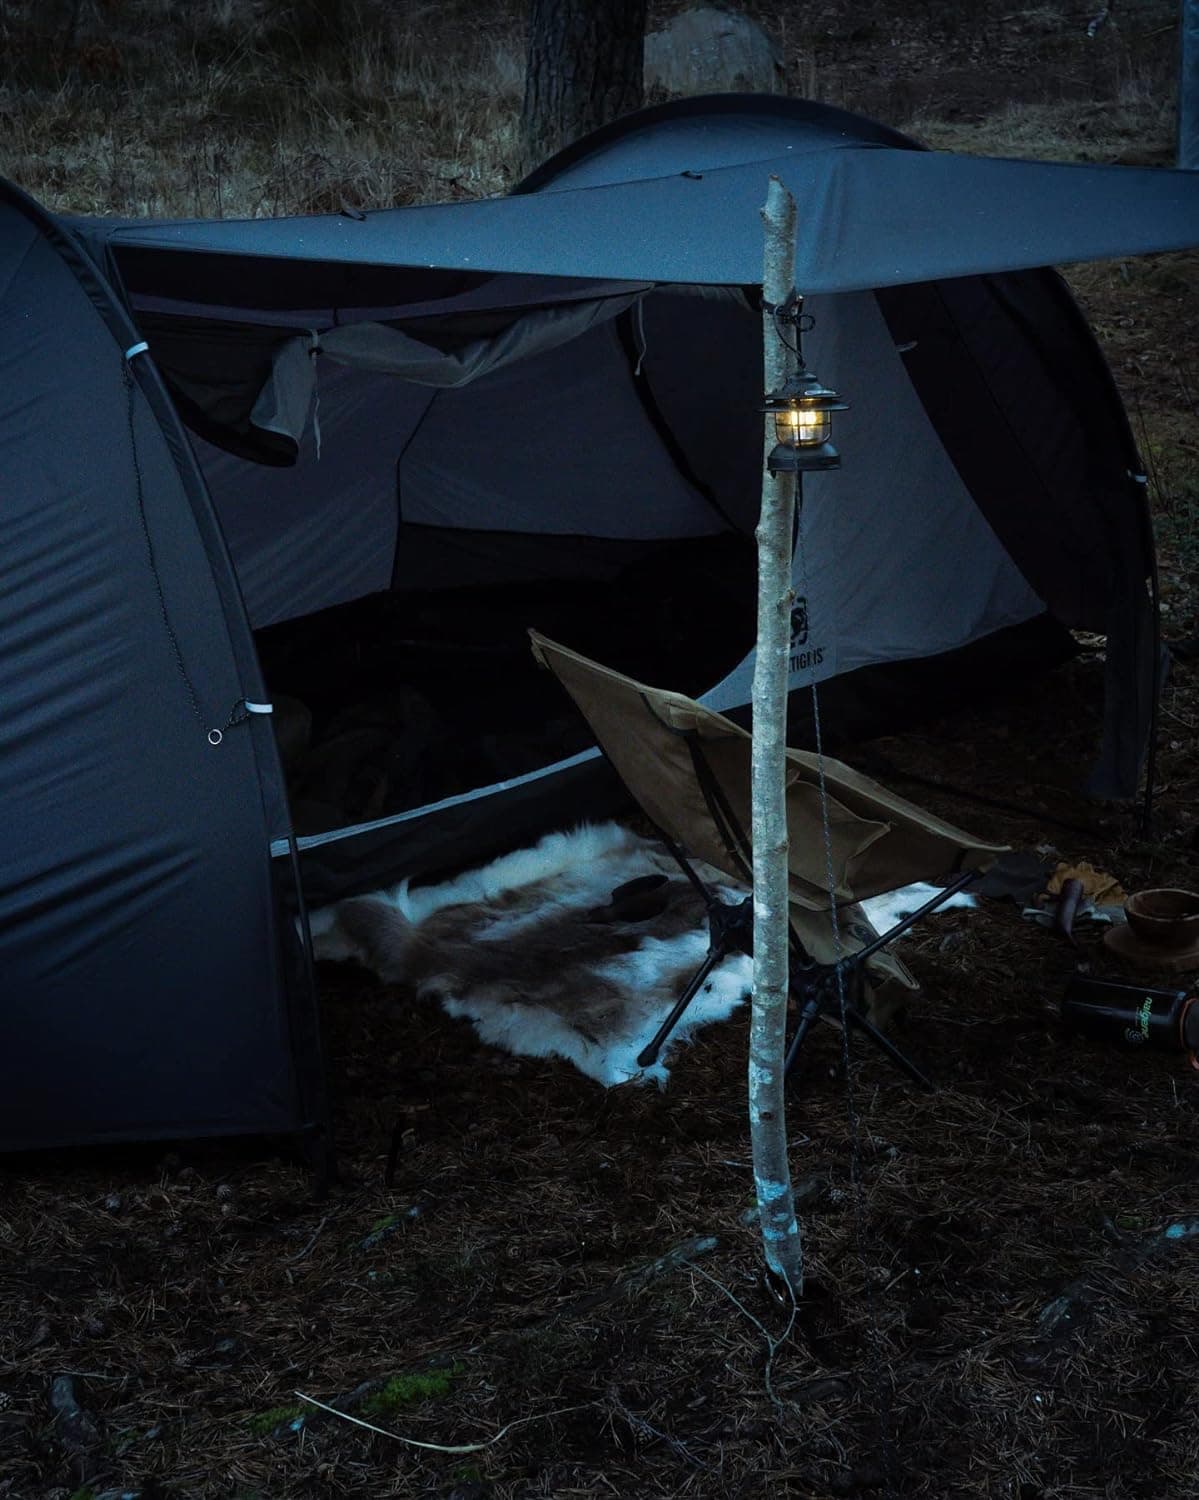 Using a stick to hold up the porch on a OneTigris COMETA Camping Tent